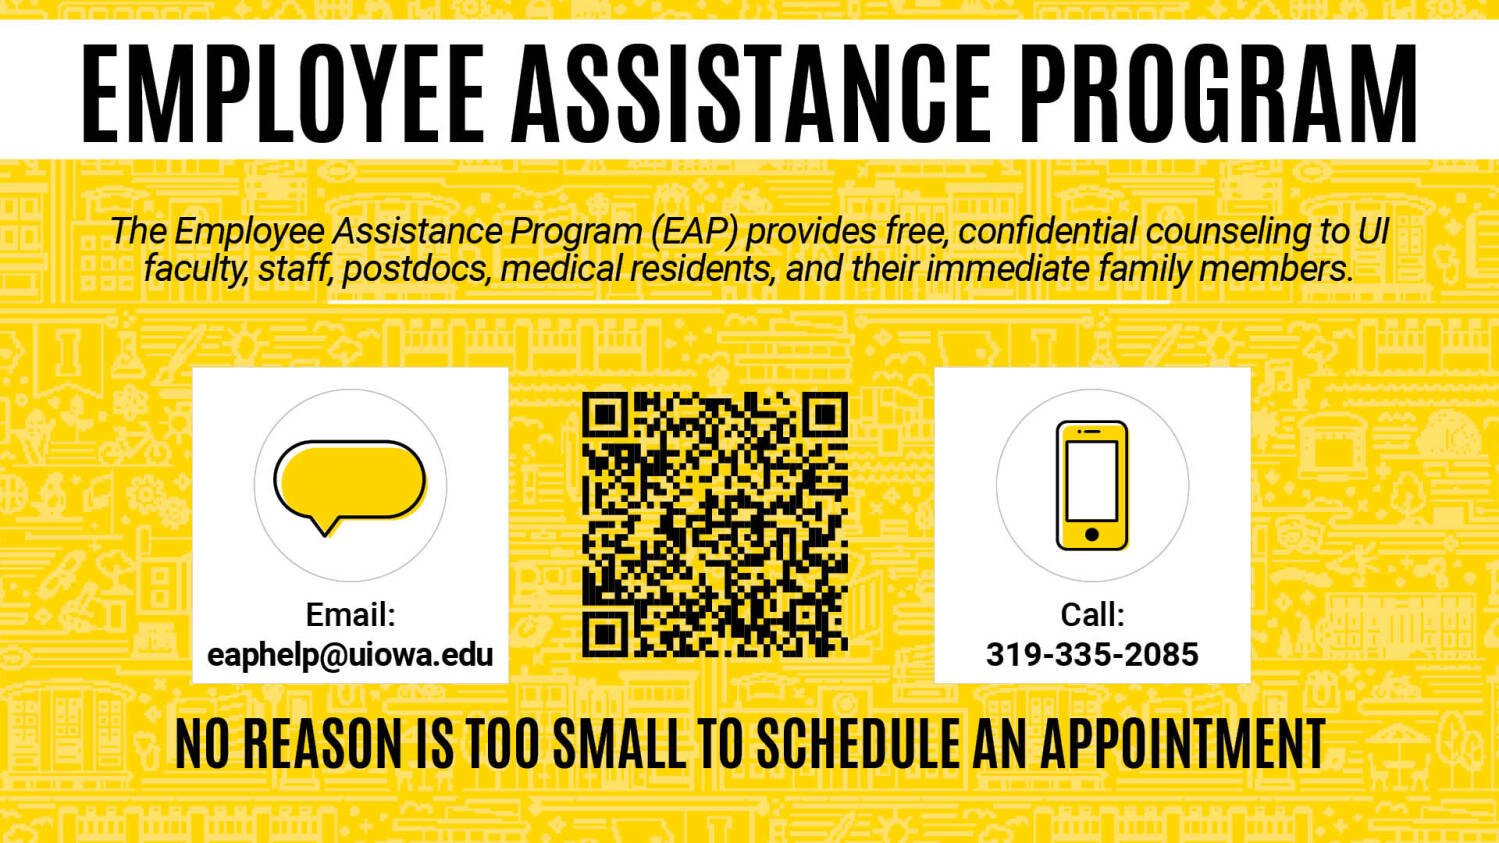 The employee assistance program provides free, confidential counseling to UI faculty, staff, post docs, medical residents and their immediate family members